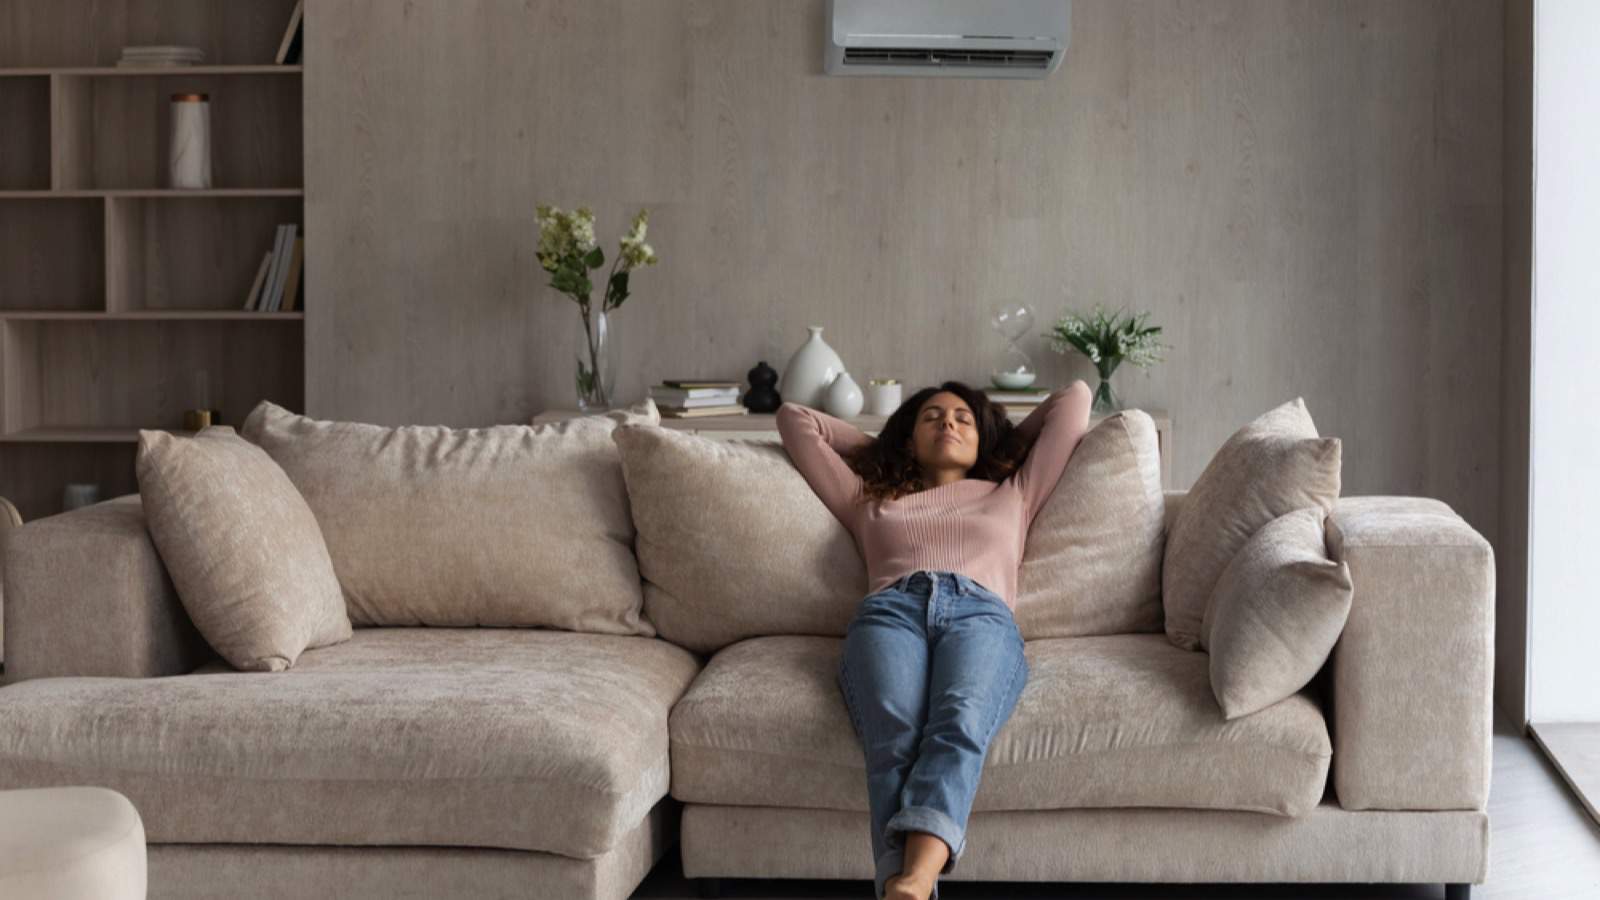 Woman lying in couch